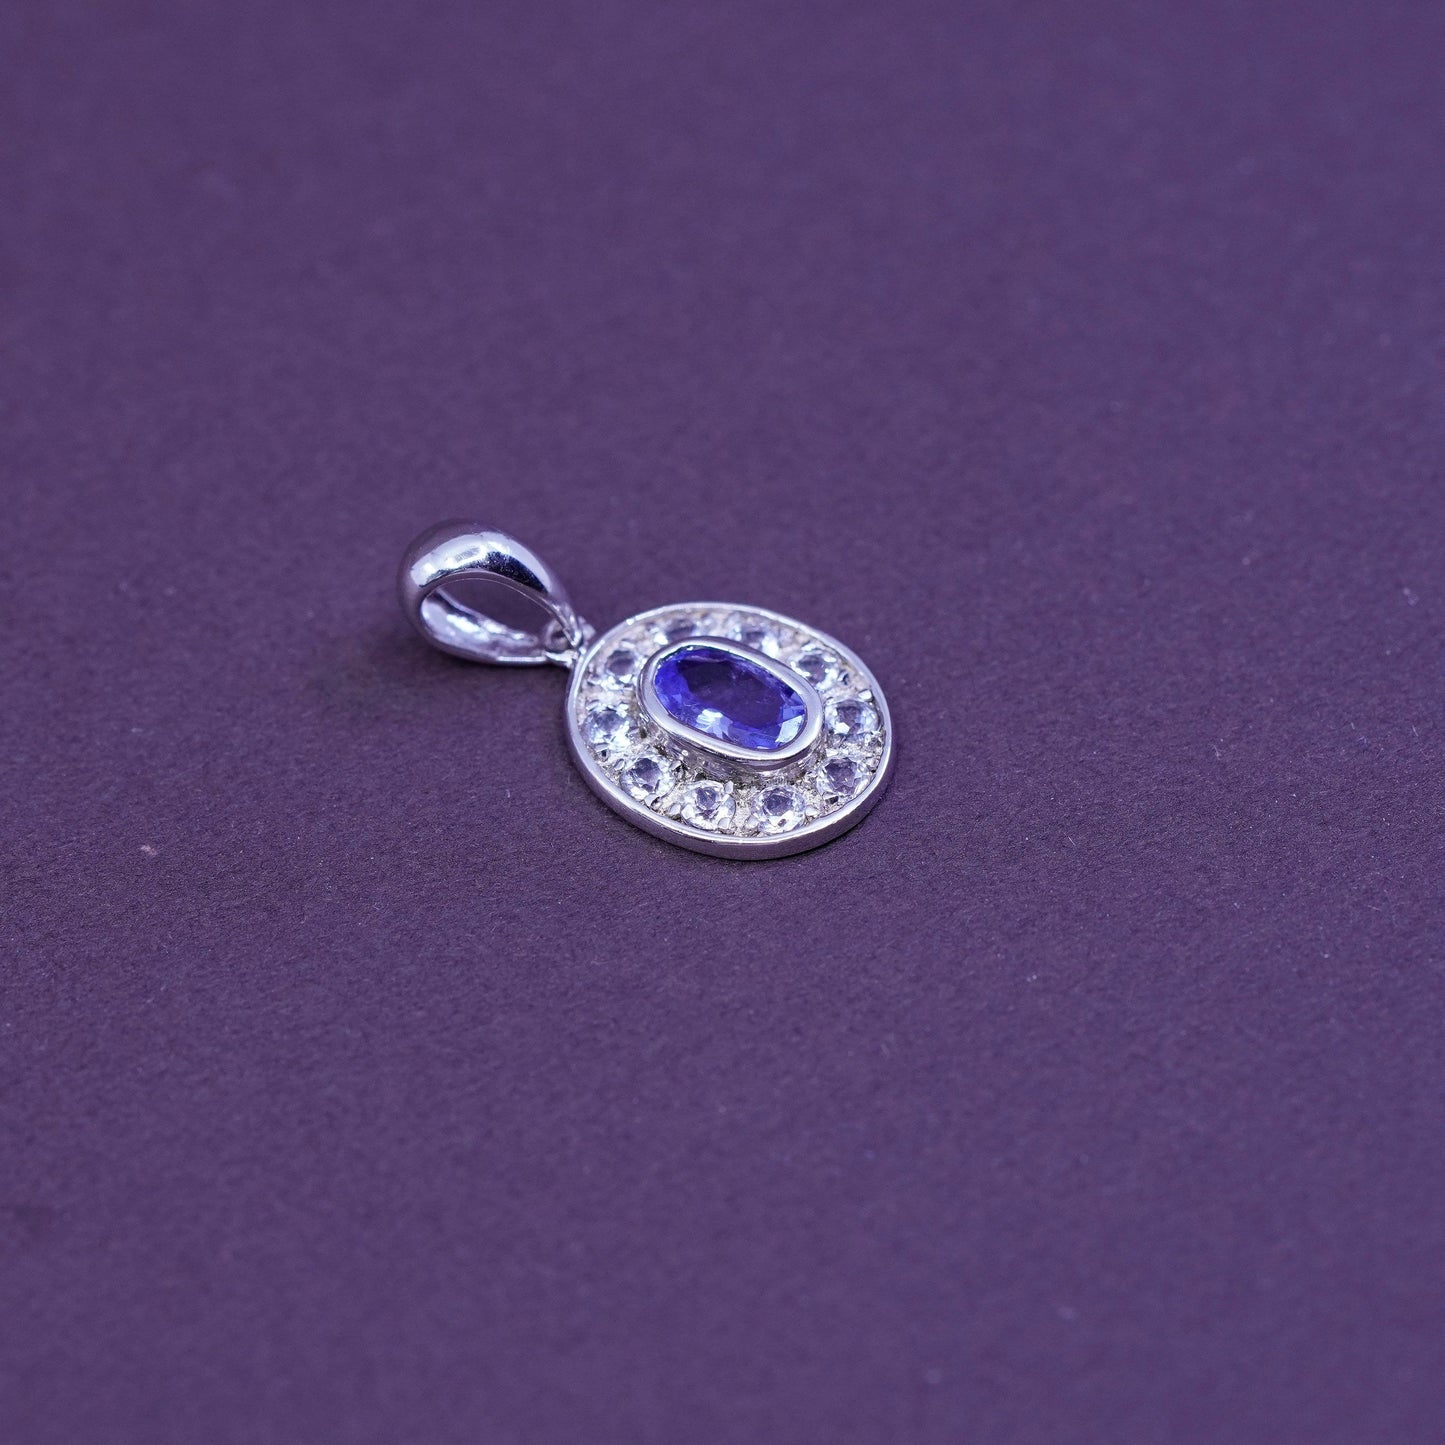 Vintage Sterling silver handmade pendant, 925 charm with amethyst and Cz